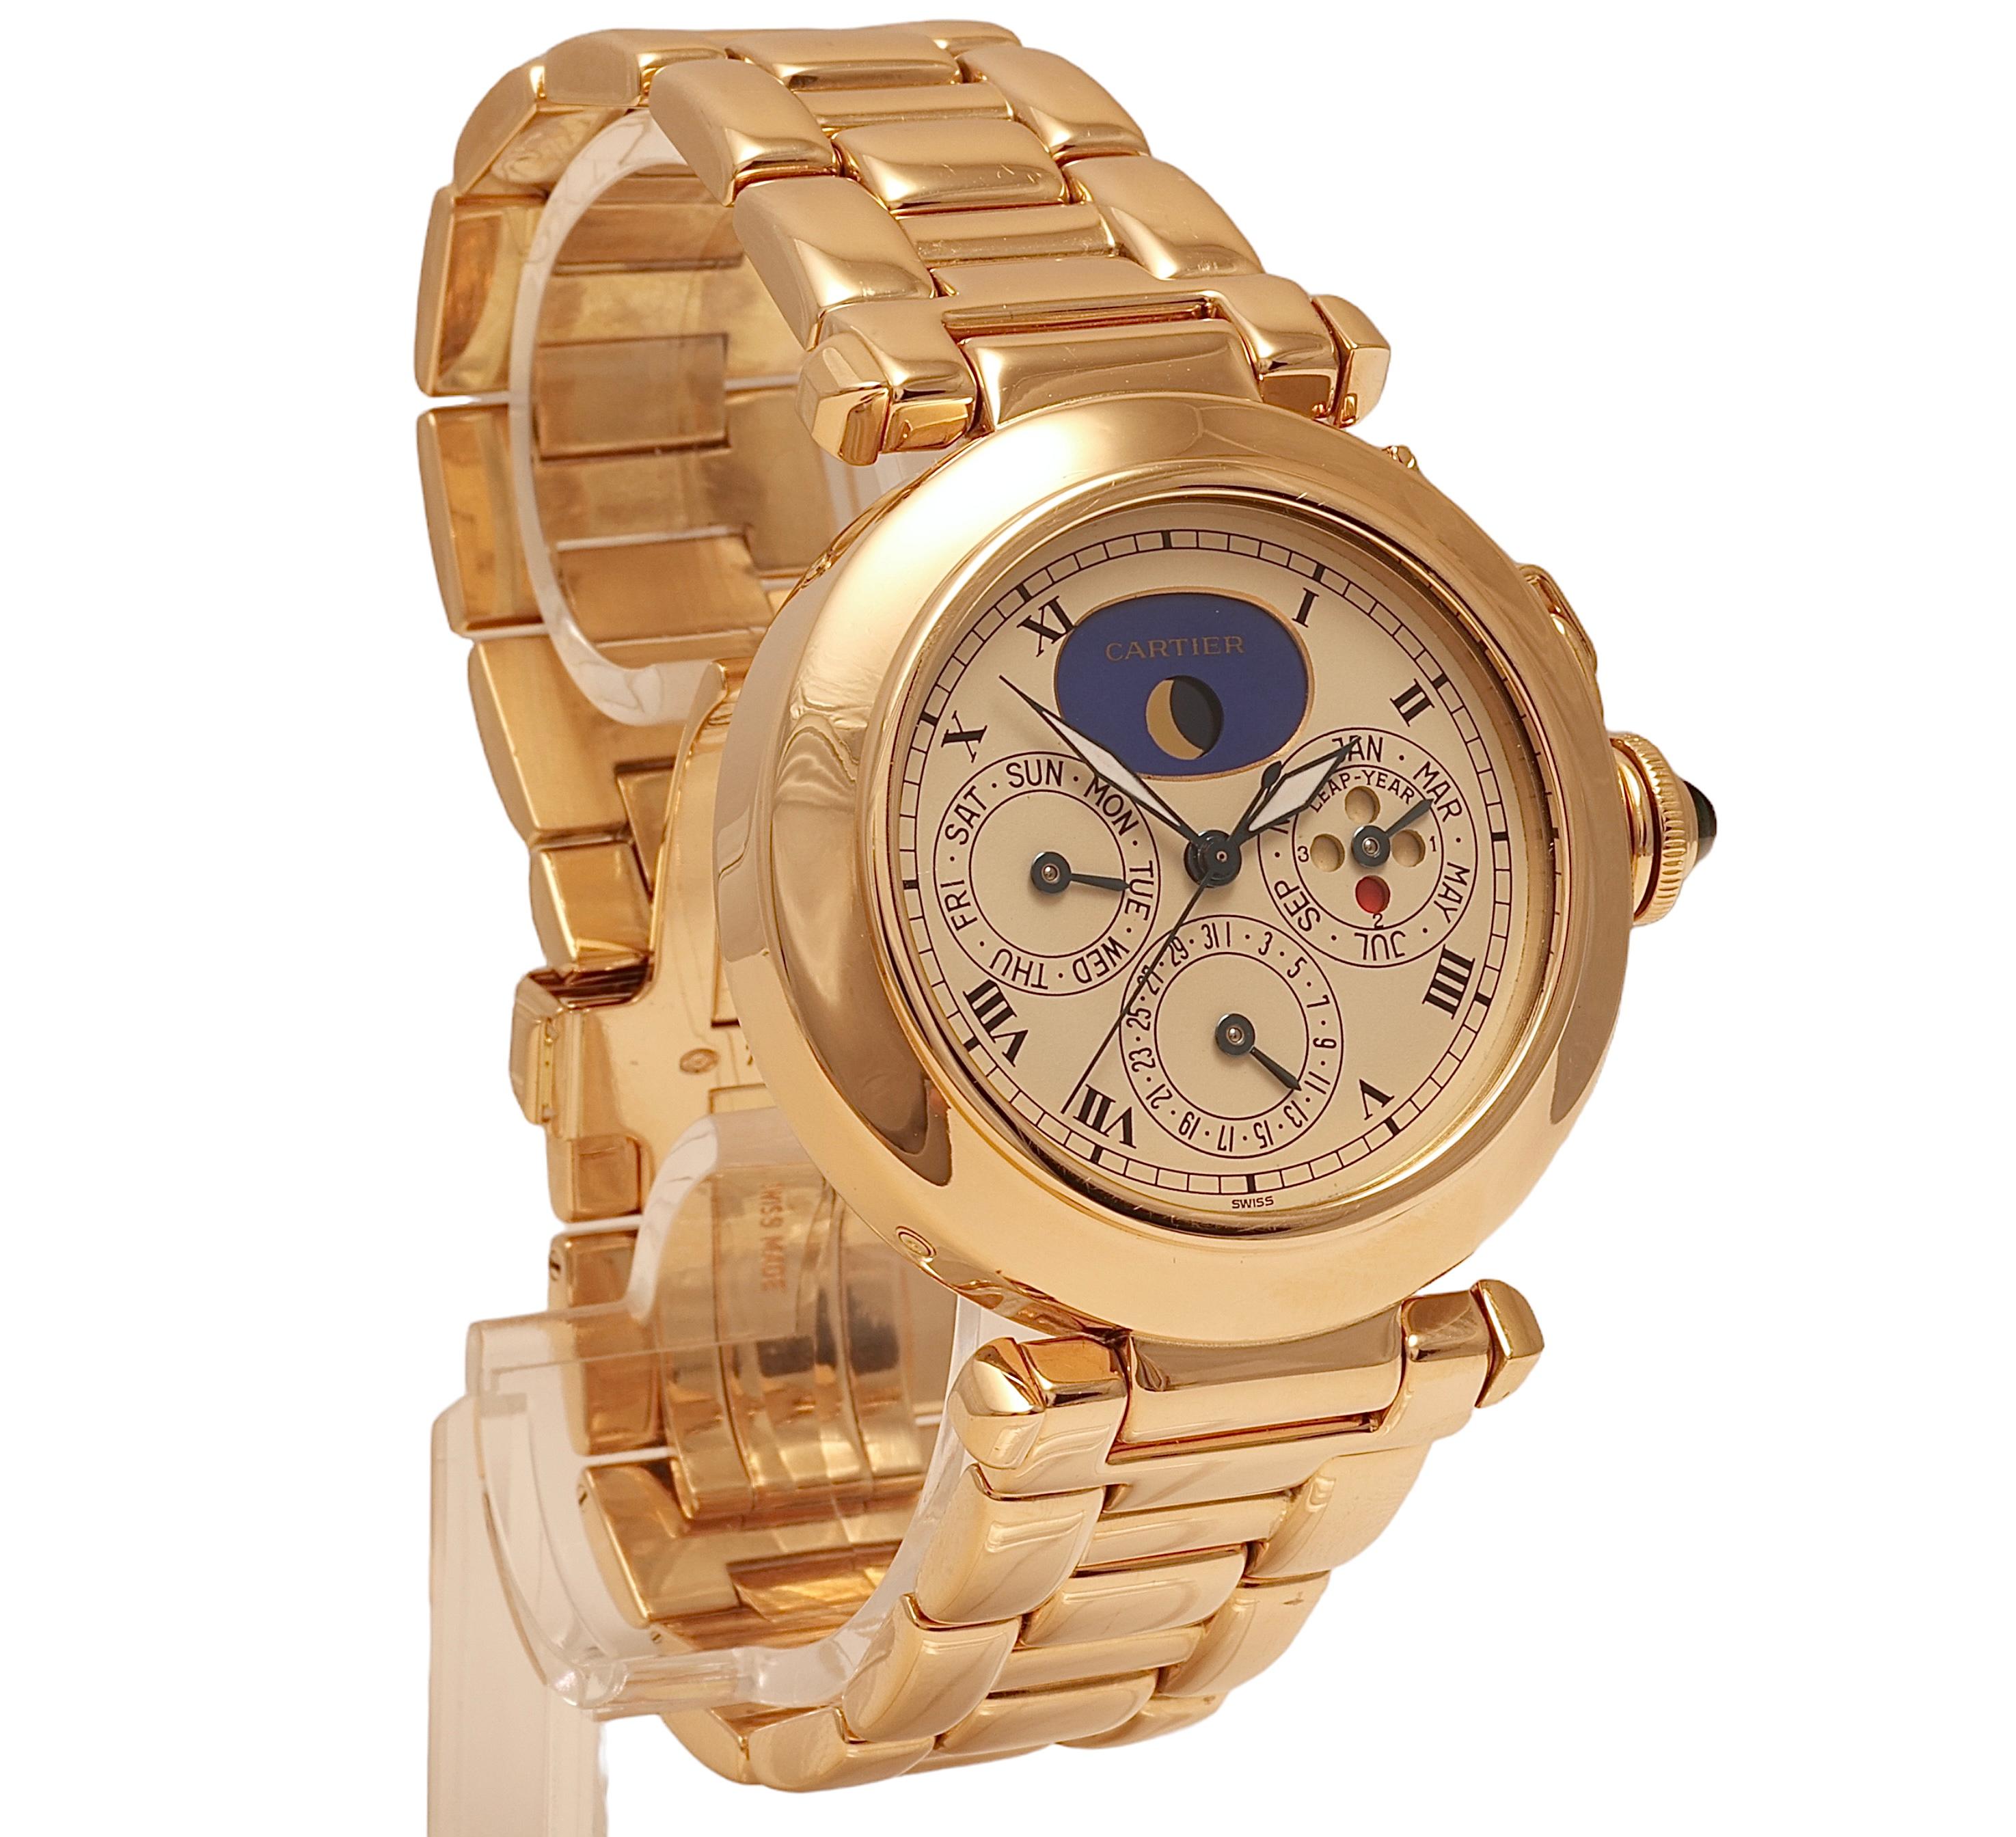 Artisan 18 Kt Cartier Pasha Perpetual Calendar Wrist Watch, Day Date Month Moon Phase For Sale